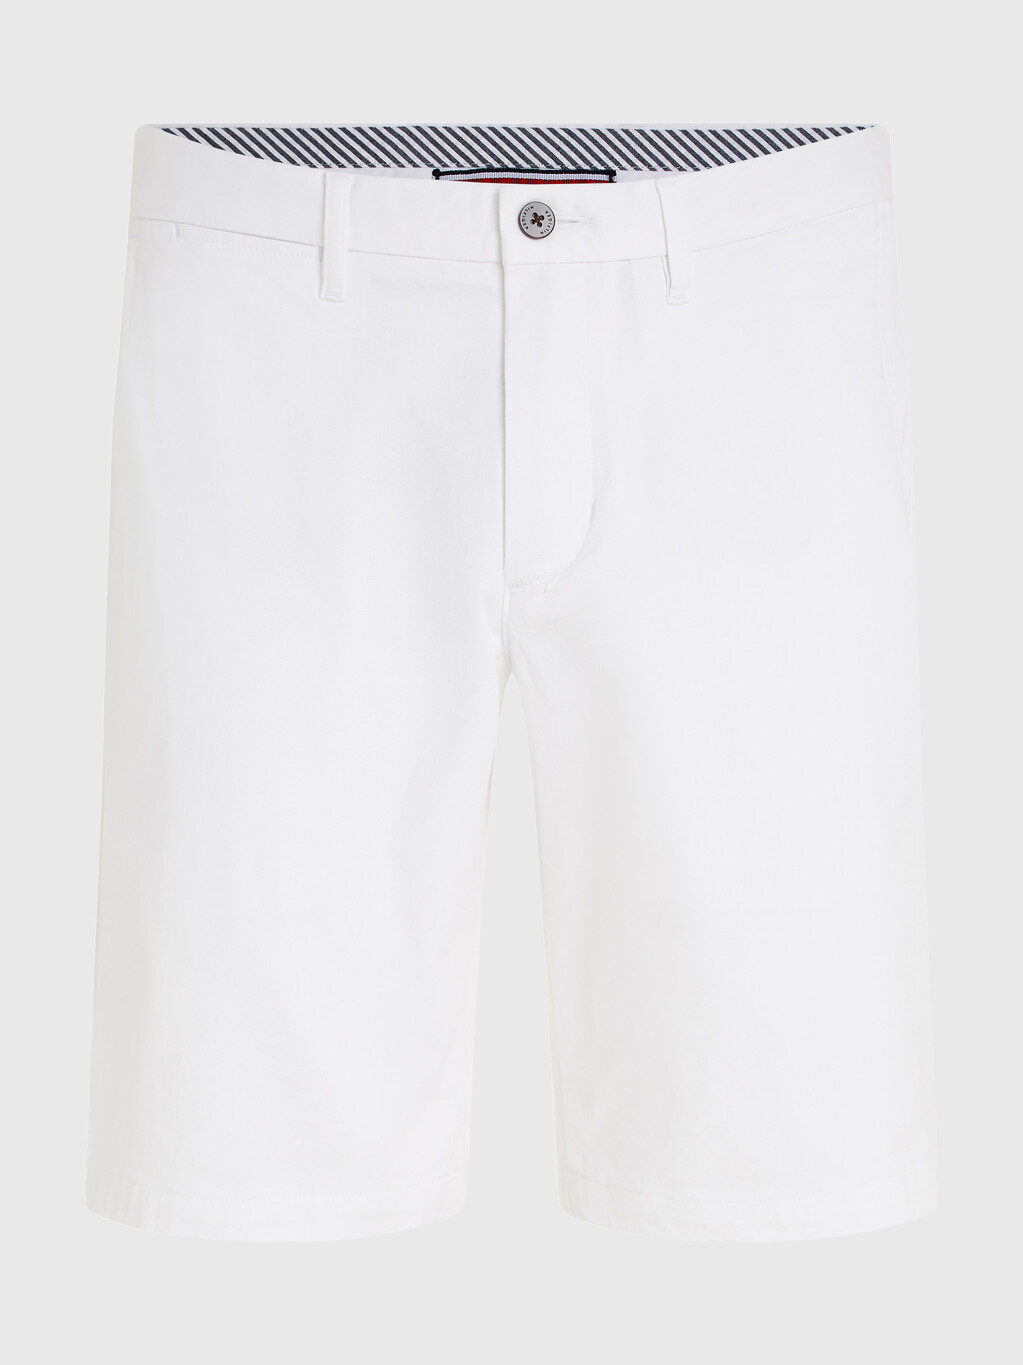 1985 Collection Brooklyn Twill Shorts, White, hi-res